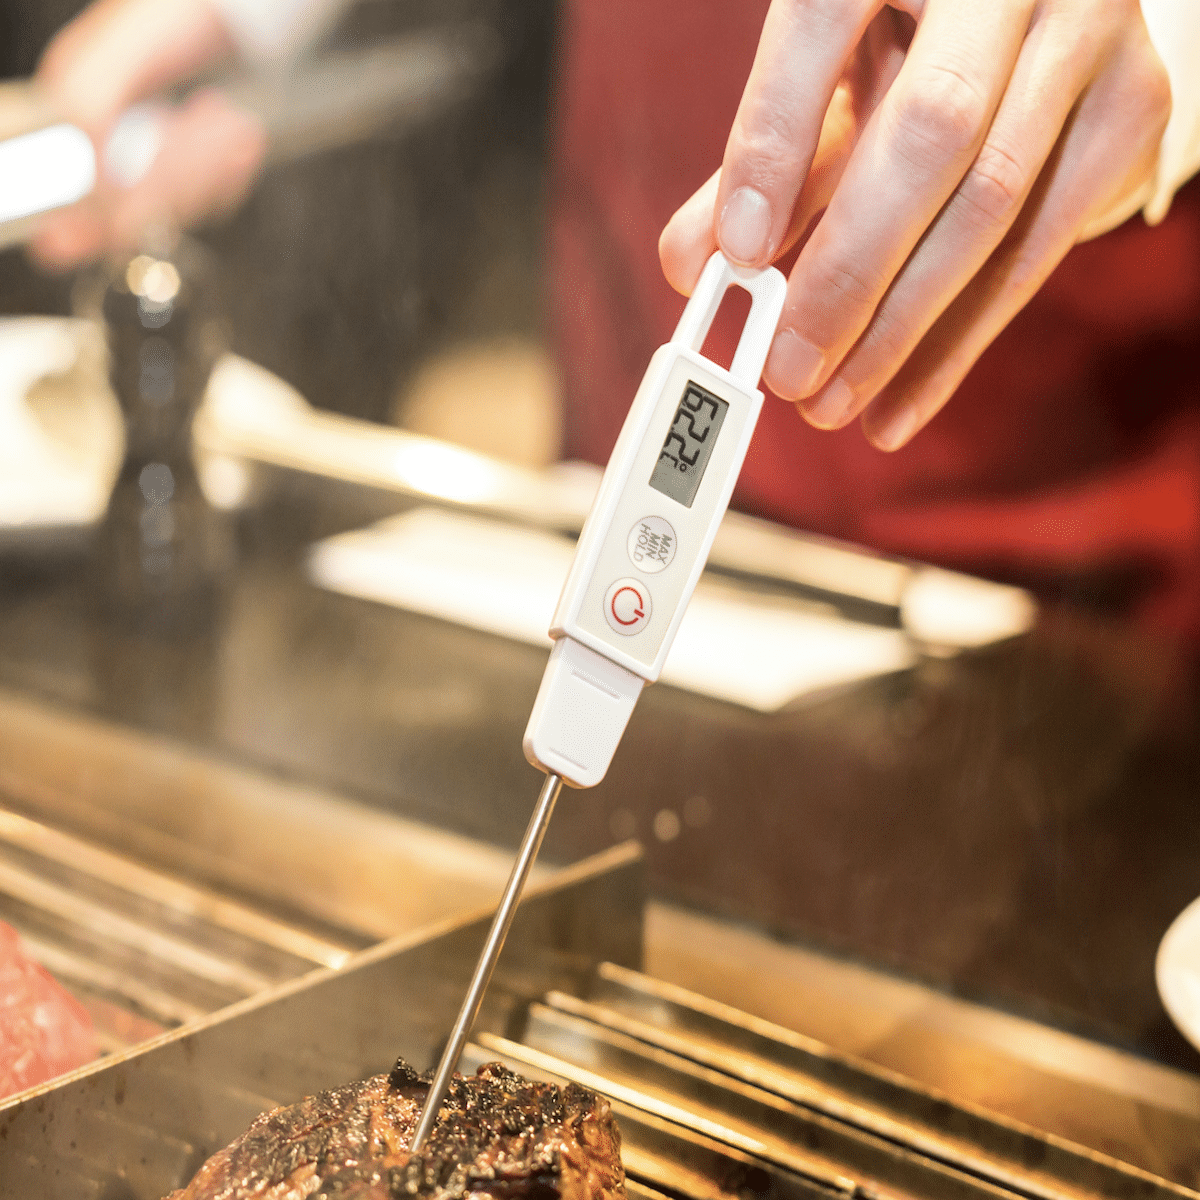 Food thermometer check temperate on burger